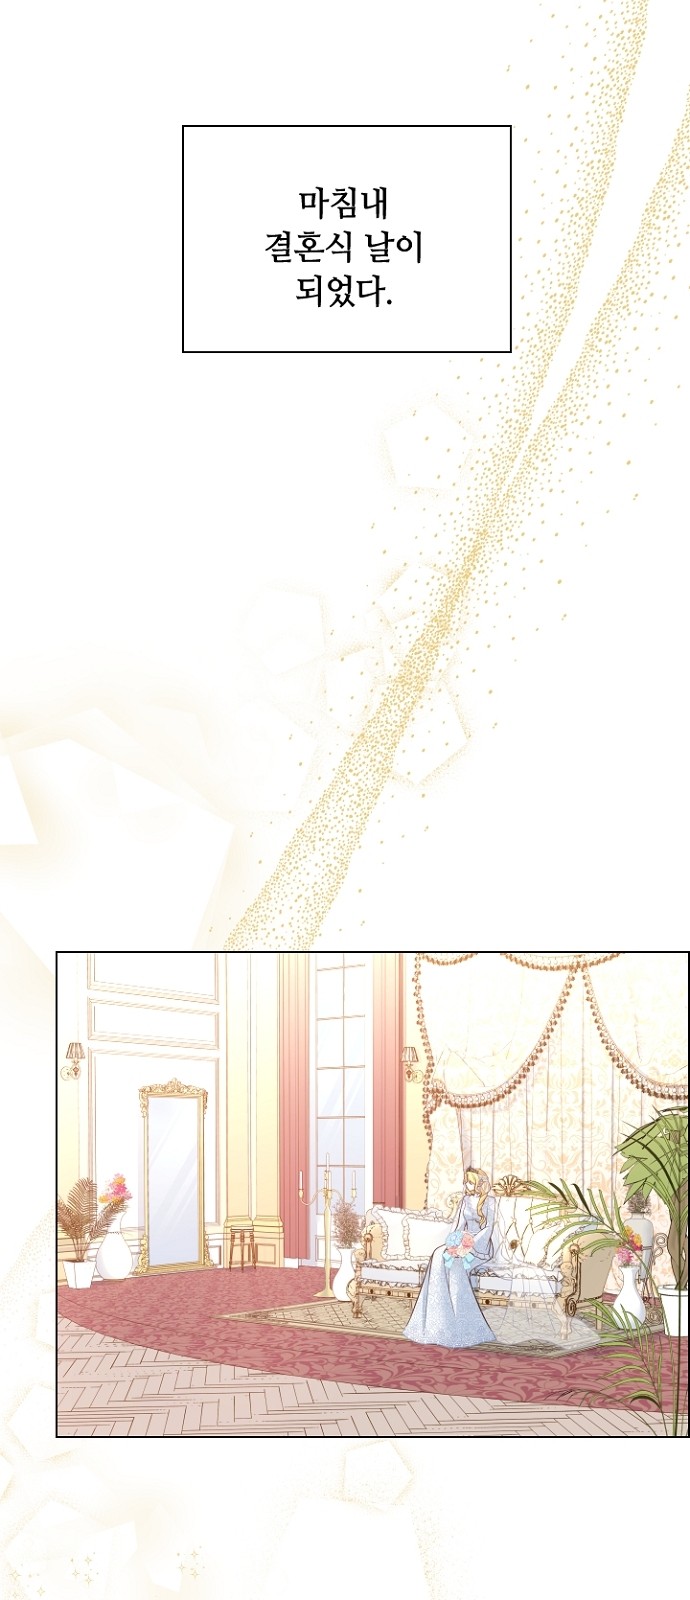 His Majesty's Proposal (A Night With the Emperor) - Chapter 34 - Page 2